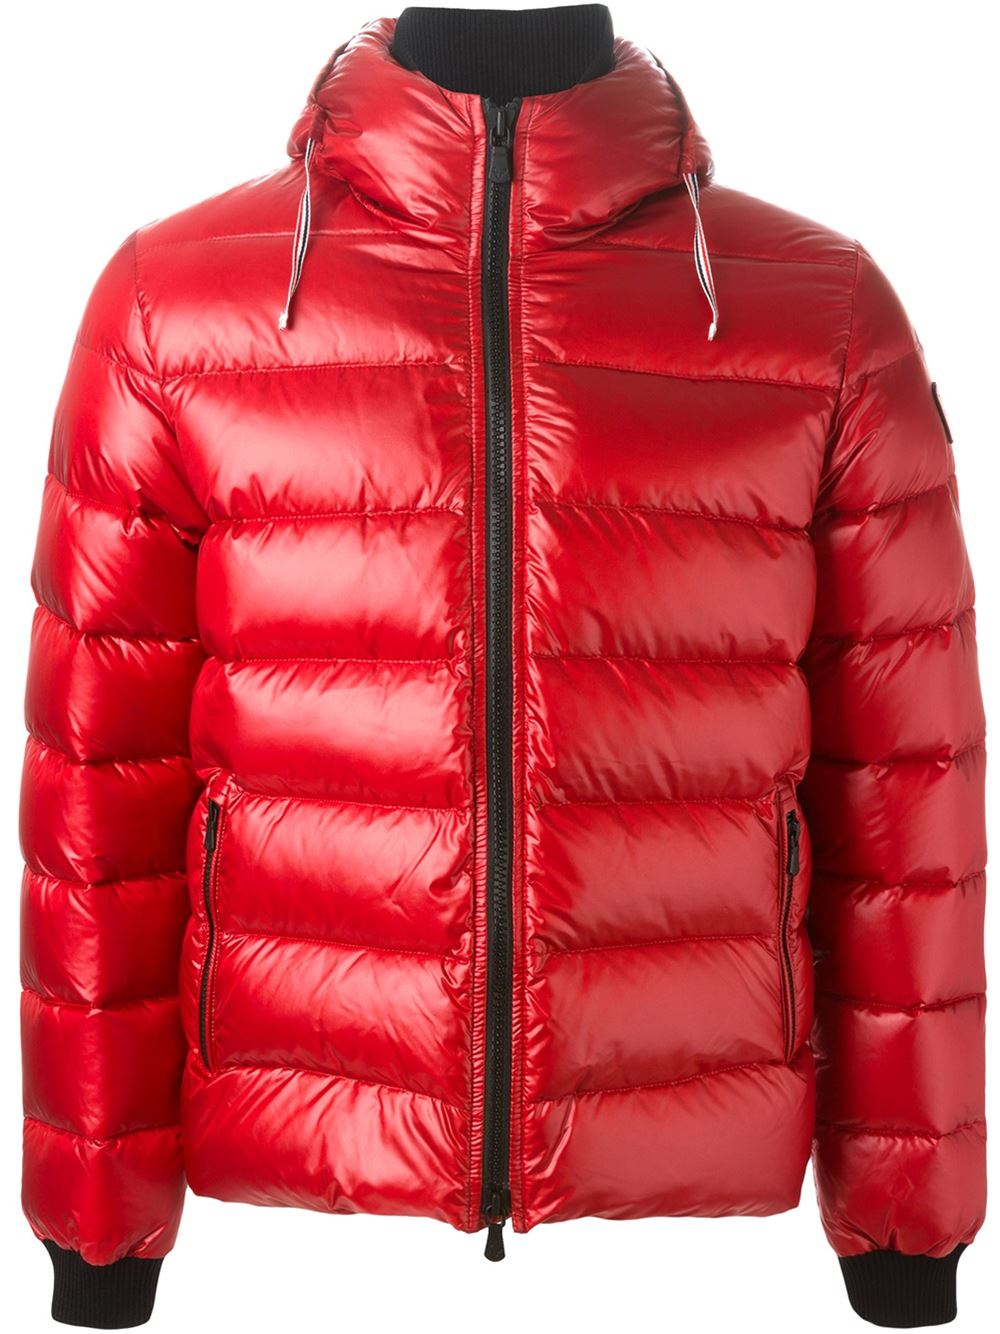 Rossignol Padded Jacket in Red for Men - Lyst